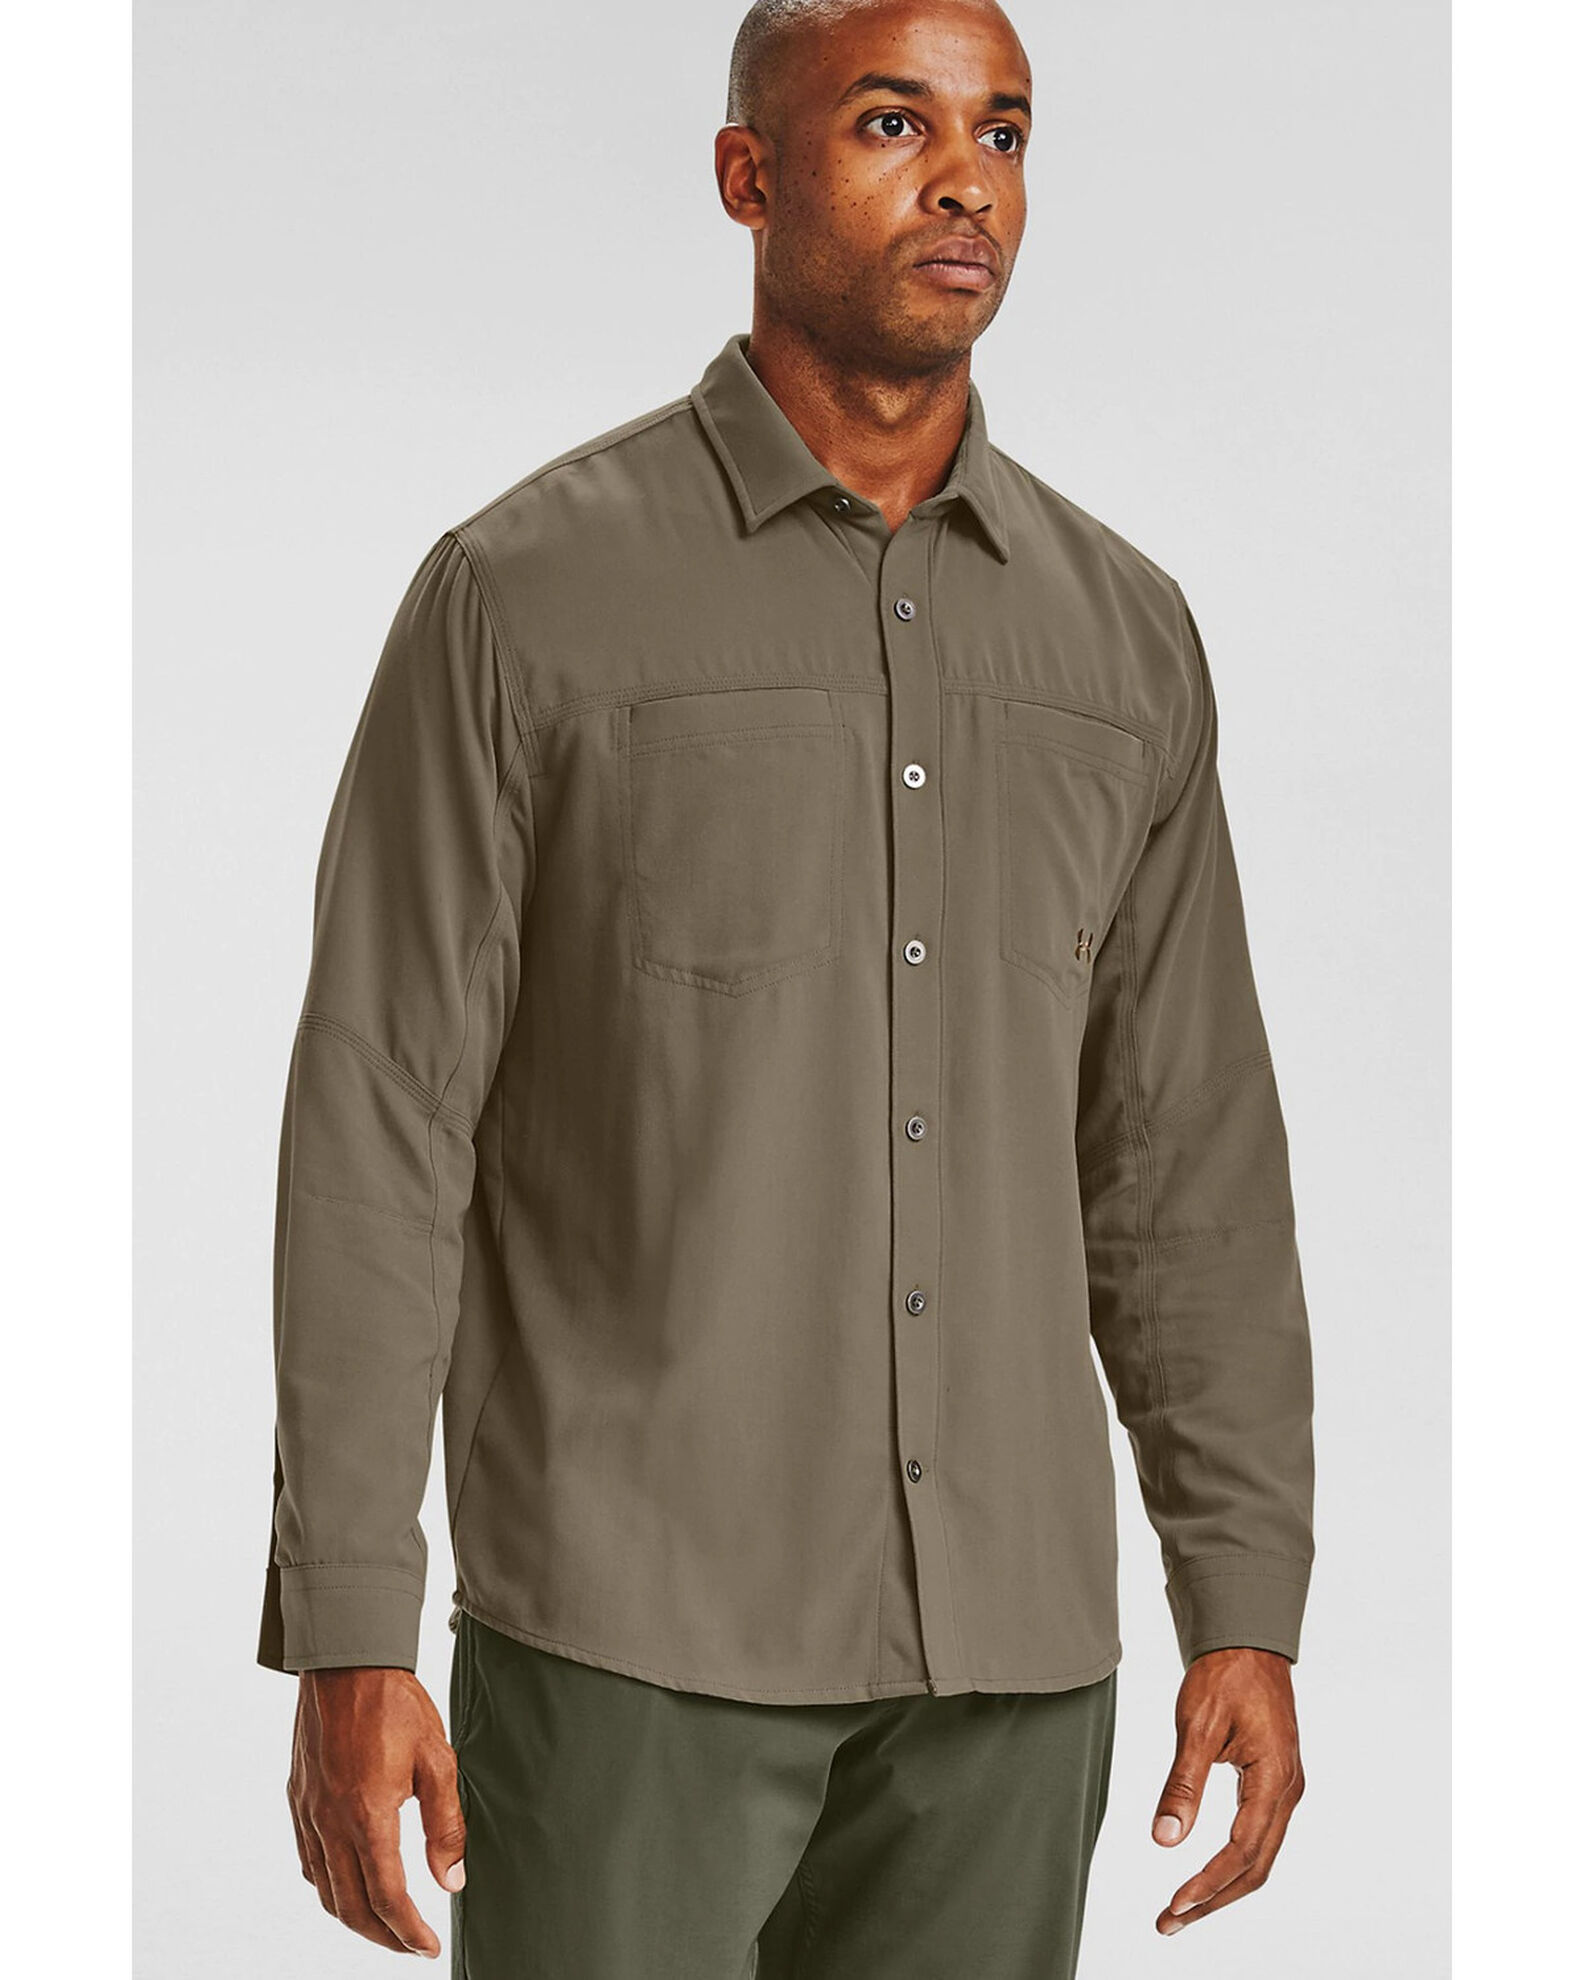 Product Name: Under Armour Men's Green Payload Button Down Long Sleeve Work  Shirt